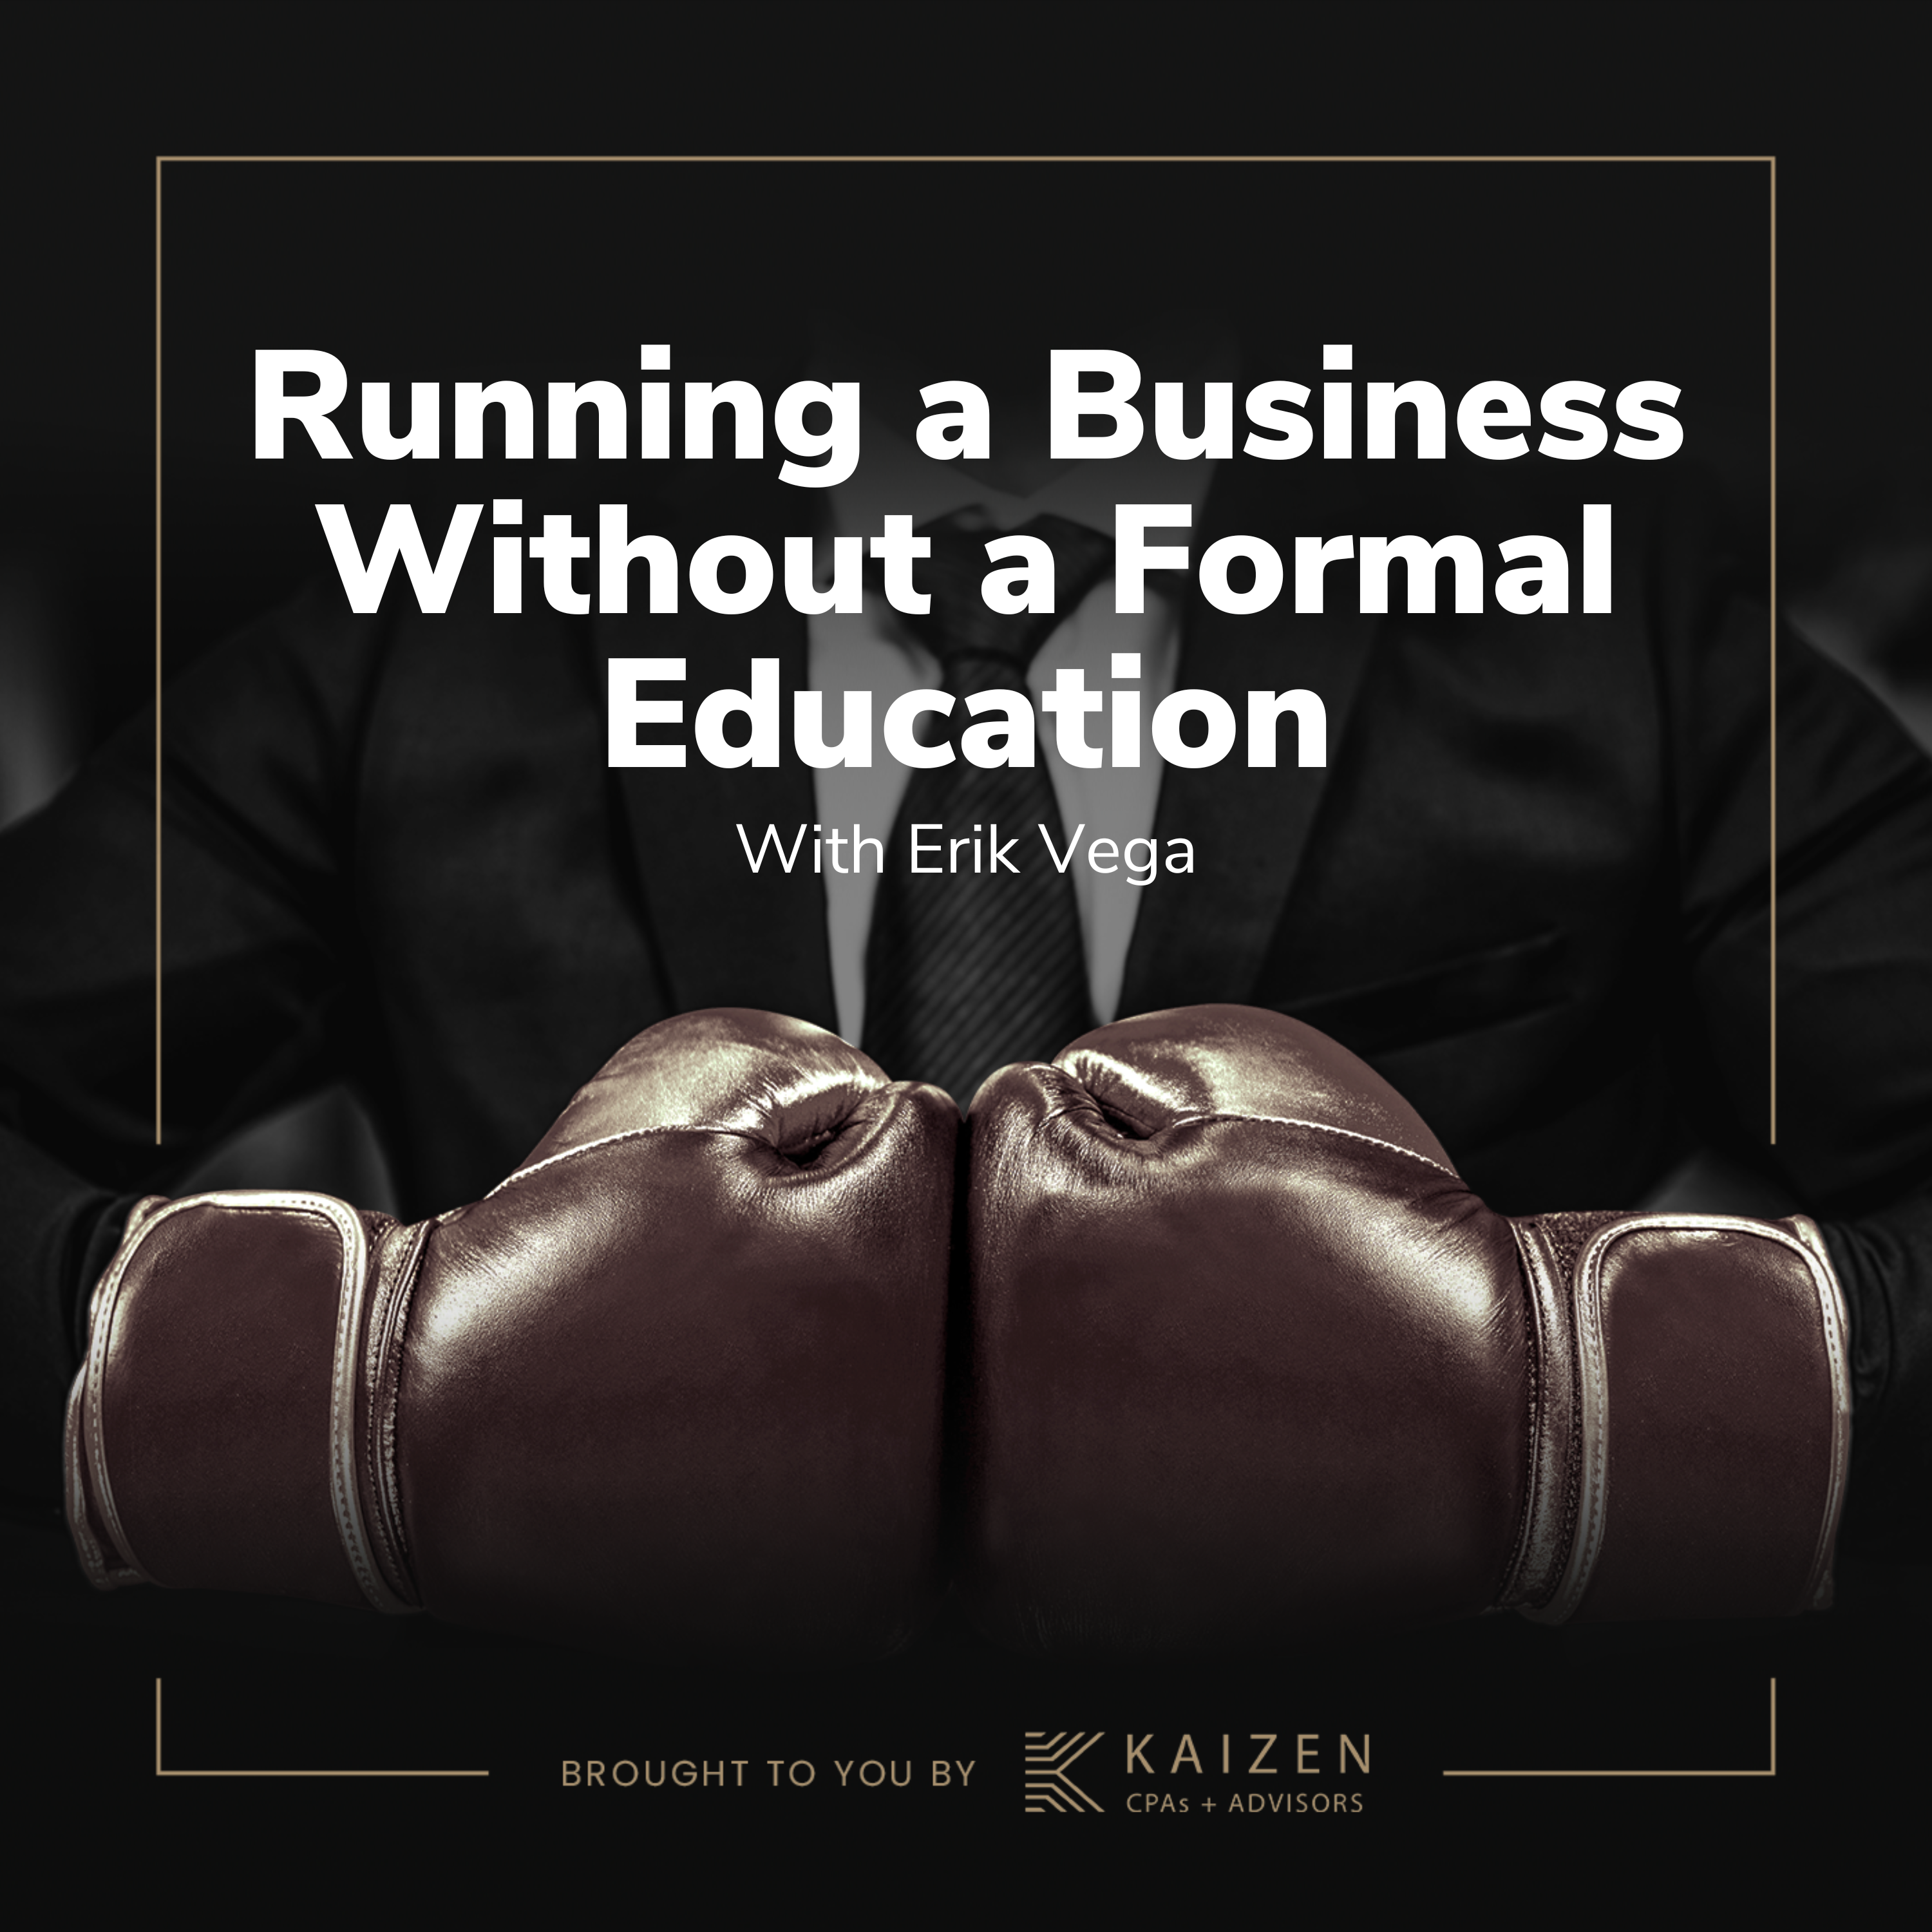 Running a Business Without a Formal Education